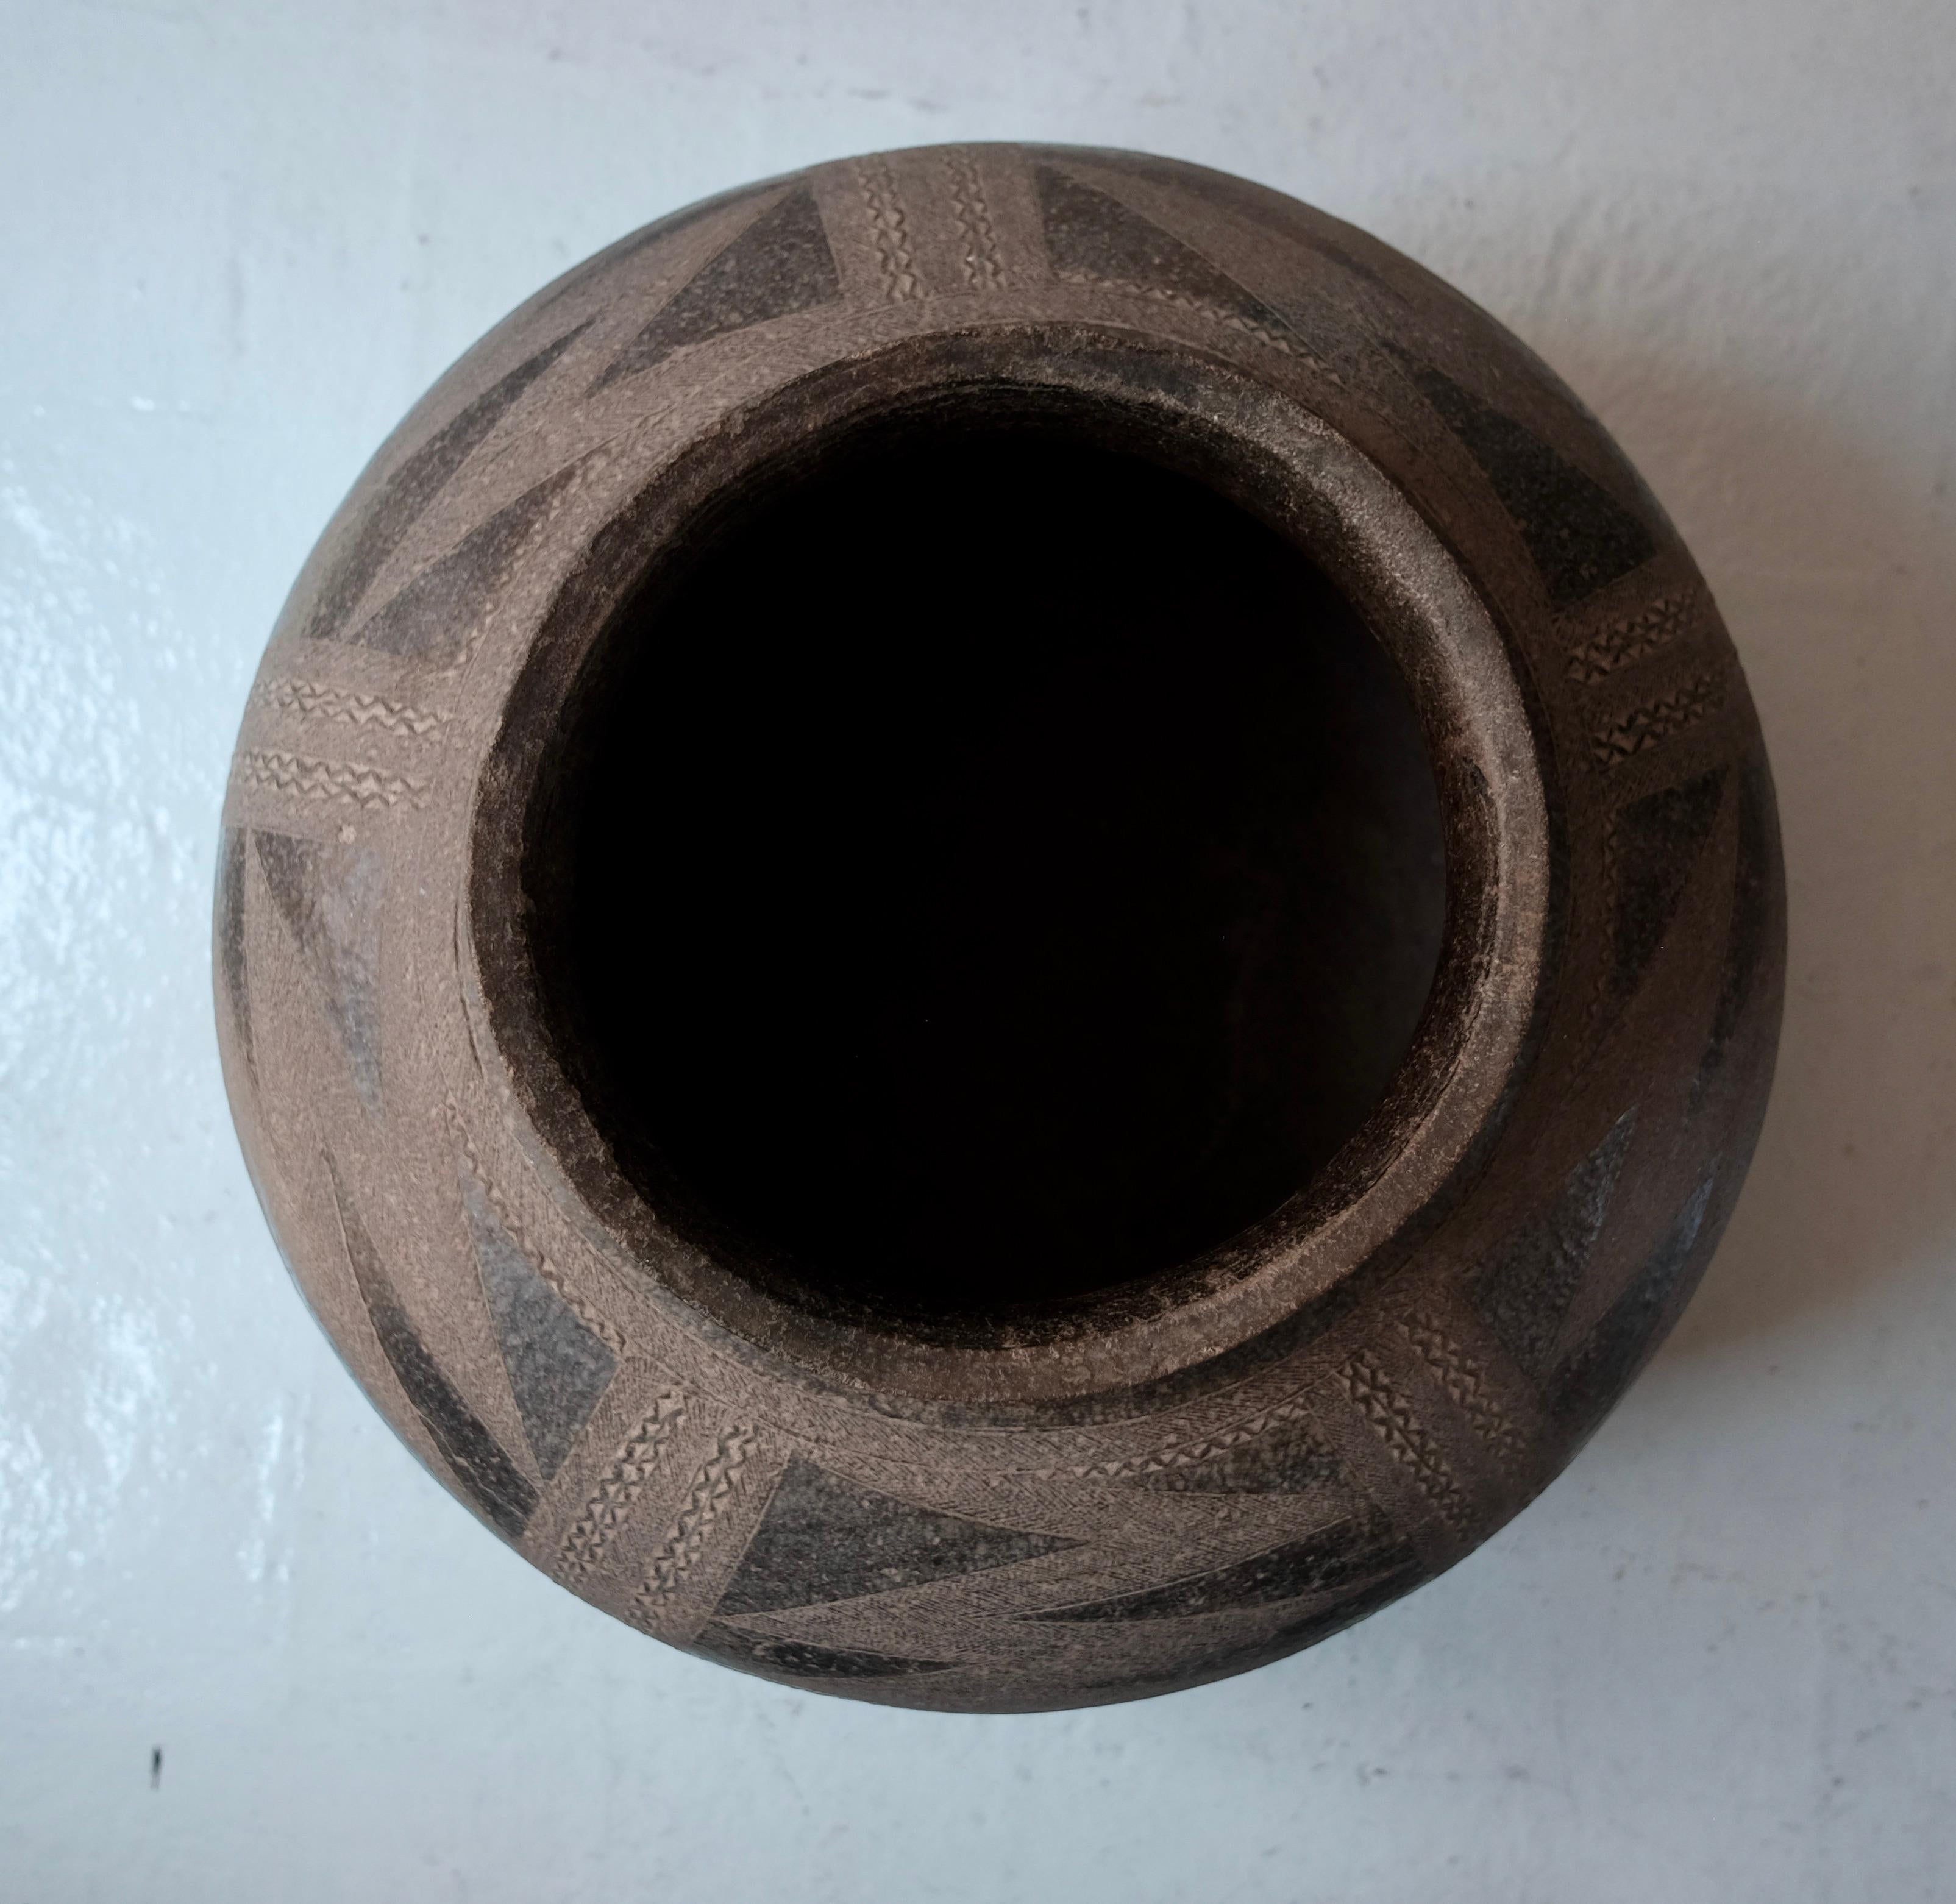 Mozambican Maconde Water Pot from Mozambique, Africa